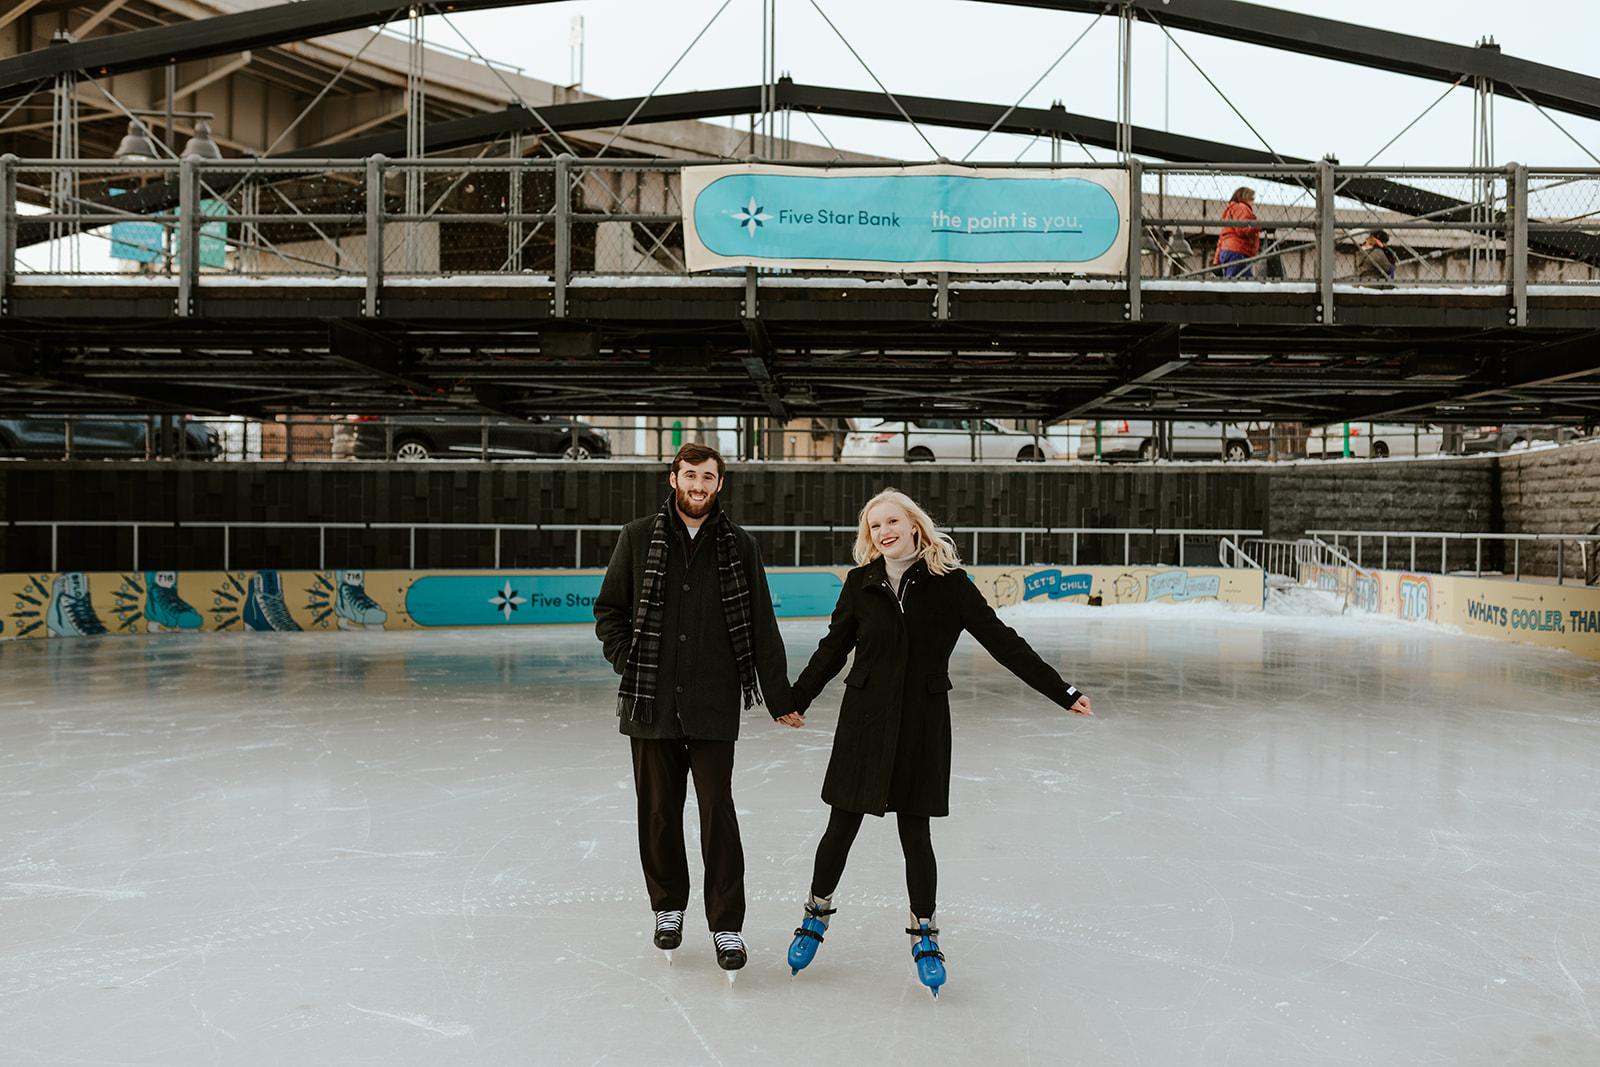 A couple doing engagement photos in Buffalo, NY skates on the ice of Canalside.